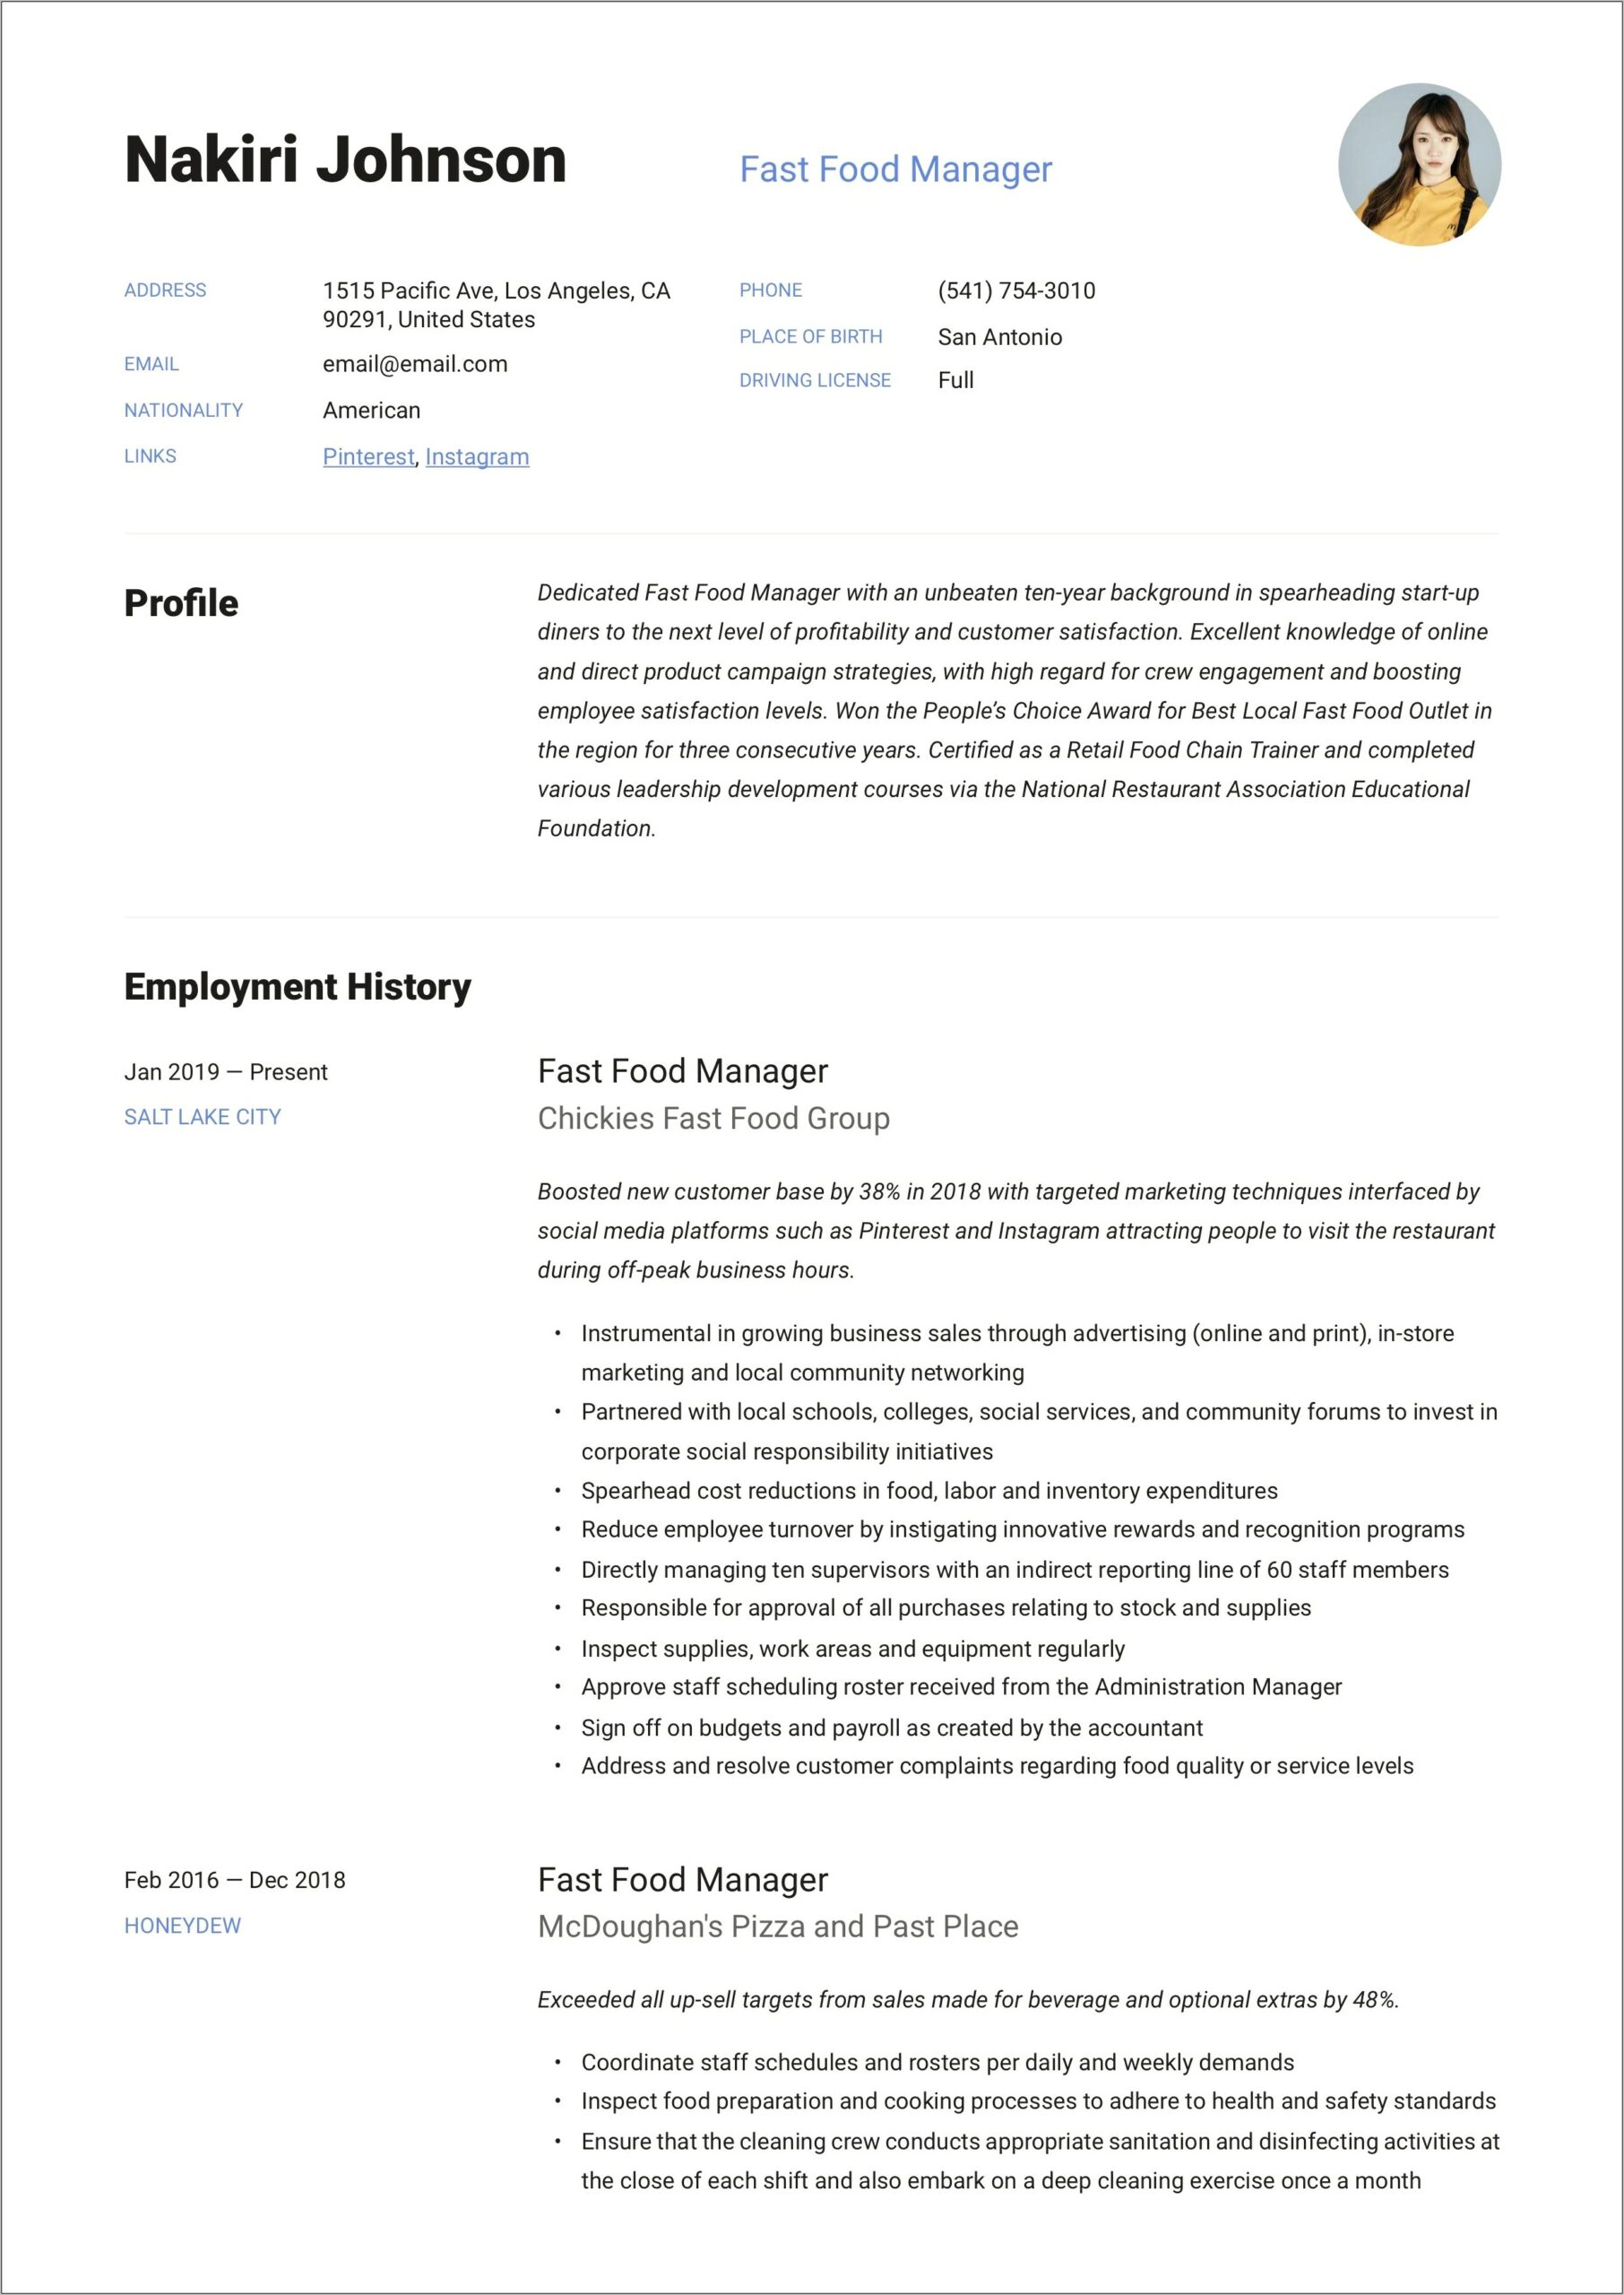 Fast Food Management Experience Resume